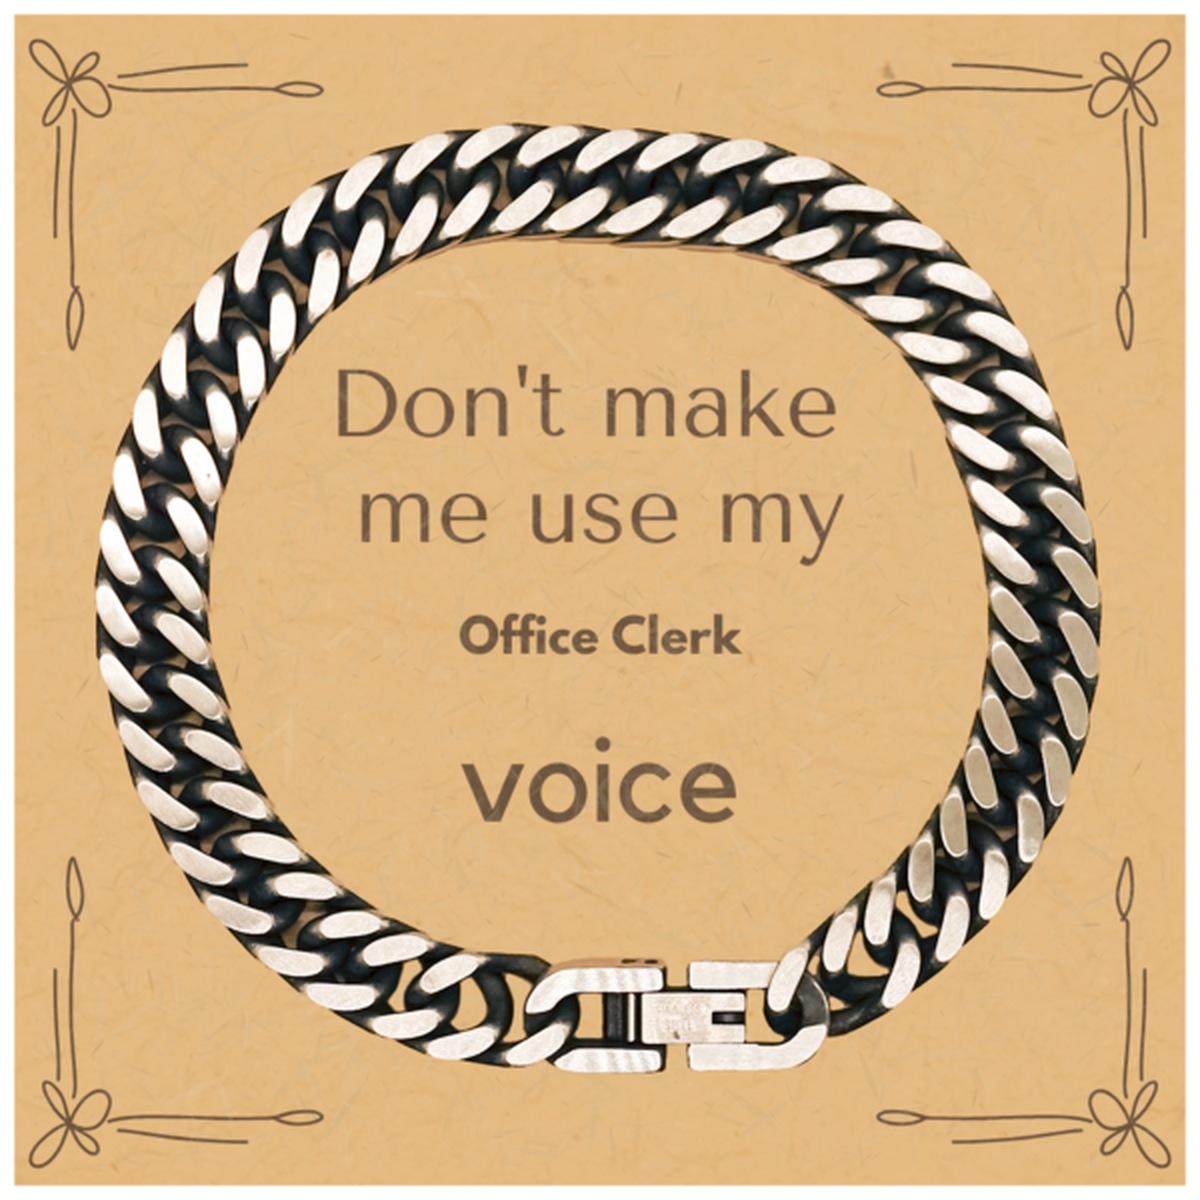 Don't make me use my Office Clerk voice, Sarcasm Office Clerk Card Gifts, Christmas Office Clerk Cuban Link Chain Bracelet Birthday Unique Gifts For Office Clerk Coworkers, Men, Women, Colleague, Friends